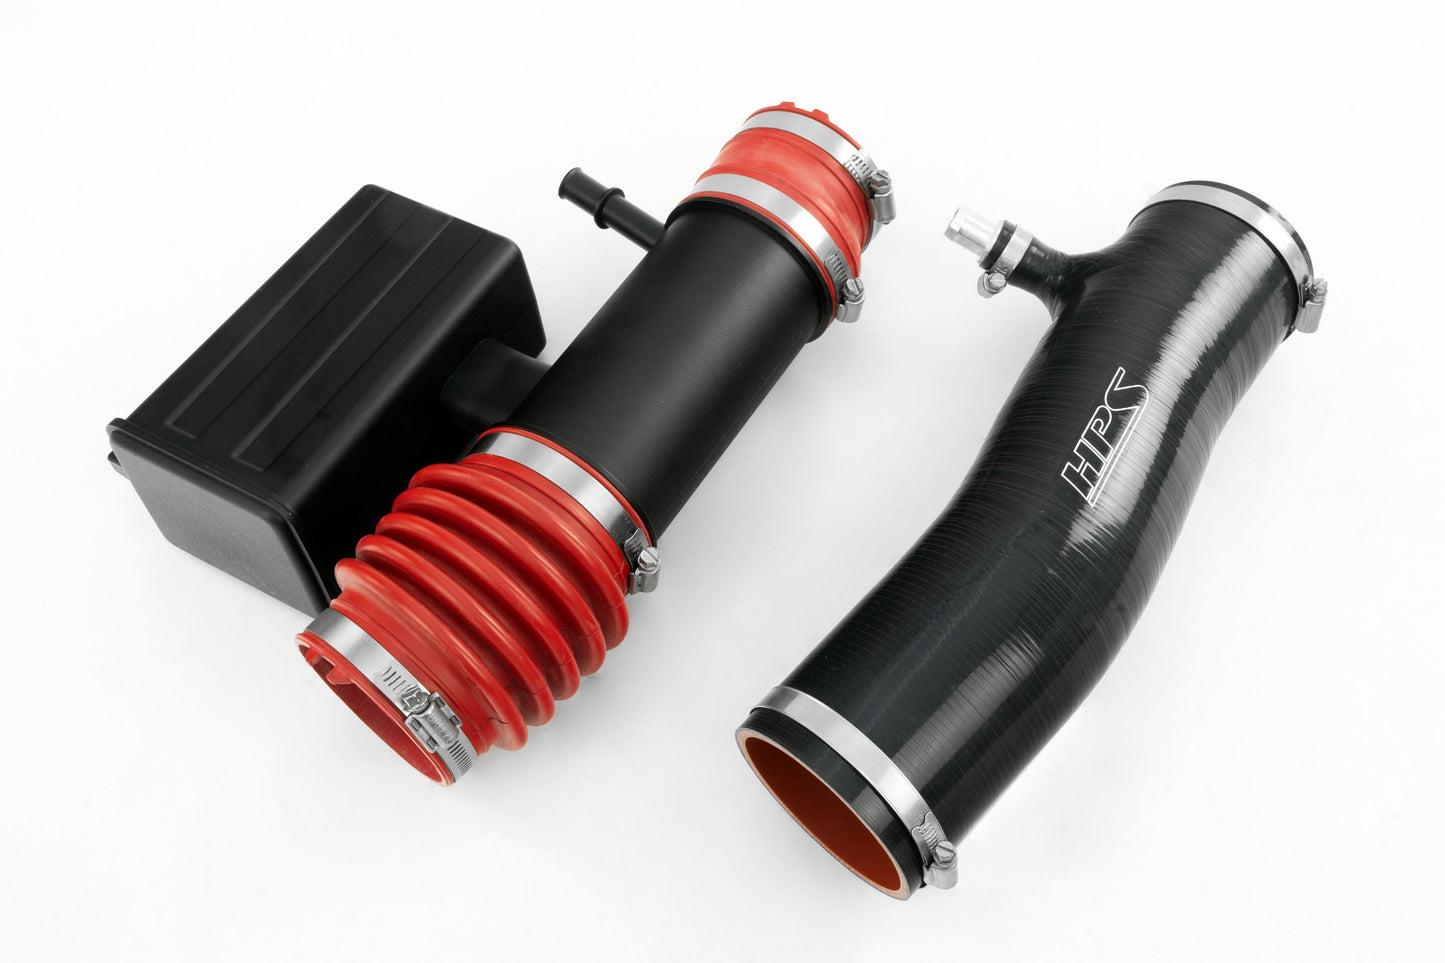 HPS Red Silicone Air Intake Kit with Drop in Air Filter, fits Toyota 2016-2022 Tacoma 3.5L V6 equipped with TRD Performance Intake - Part # PTR03-35160, 827-723R